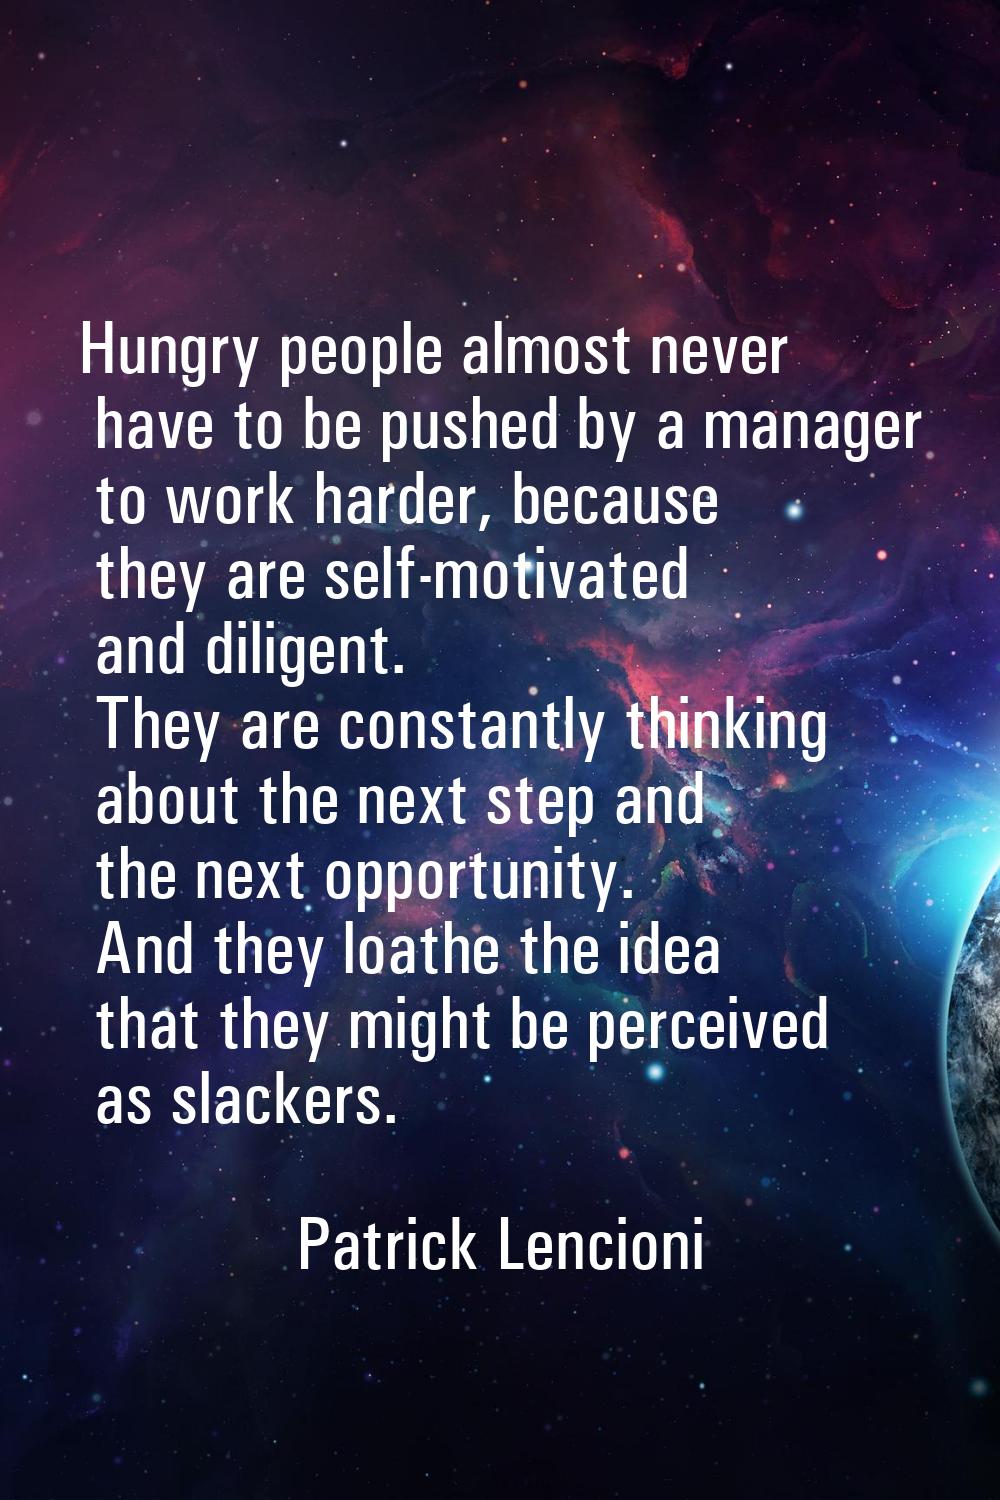 Hungry people almost never have to be pushed by a manager to work harder, because they are self-mot